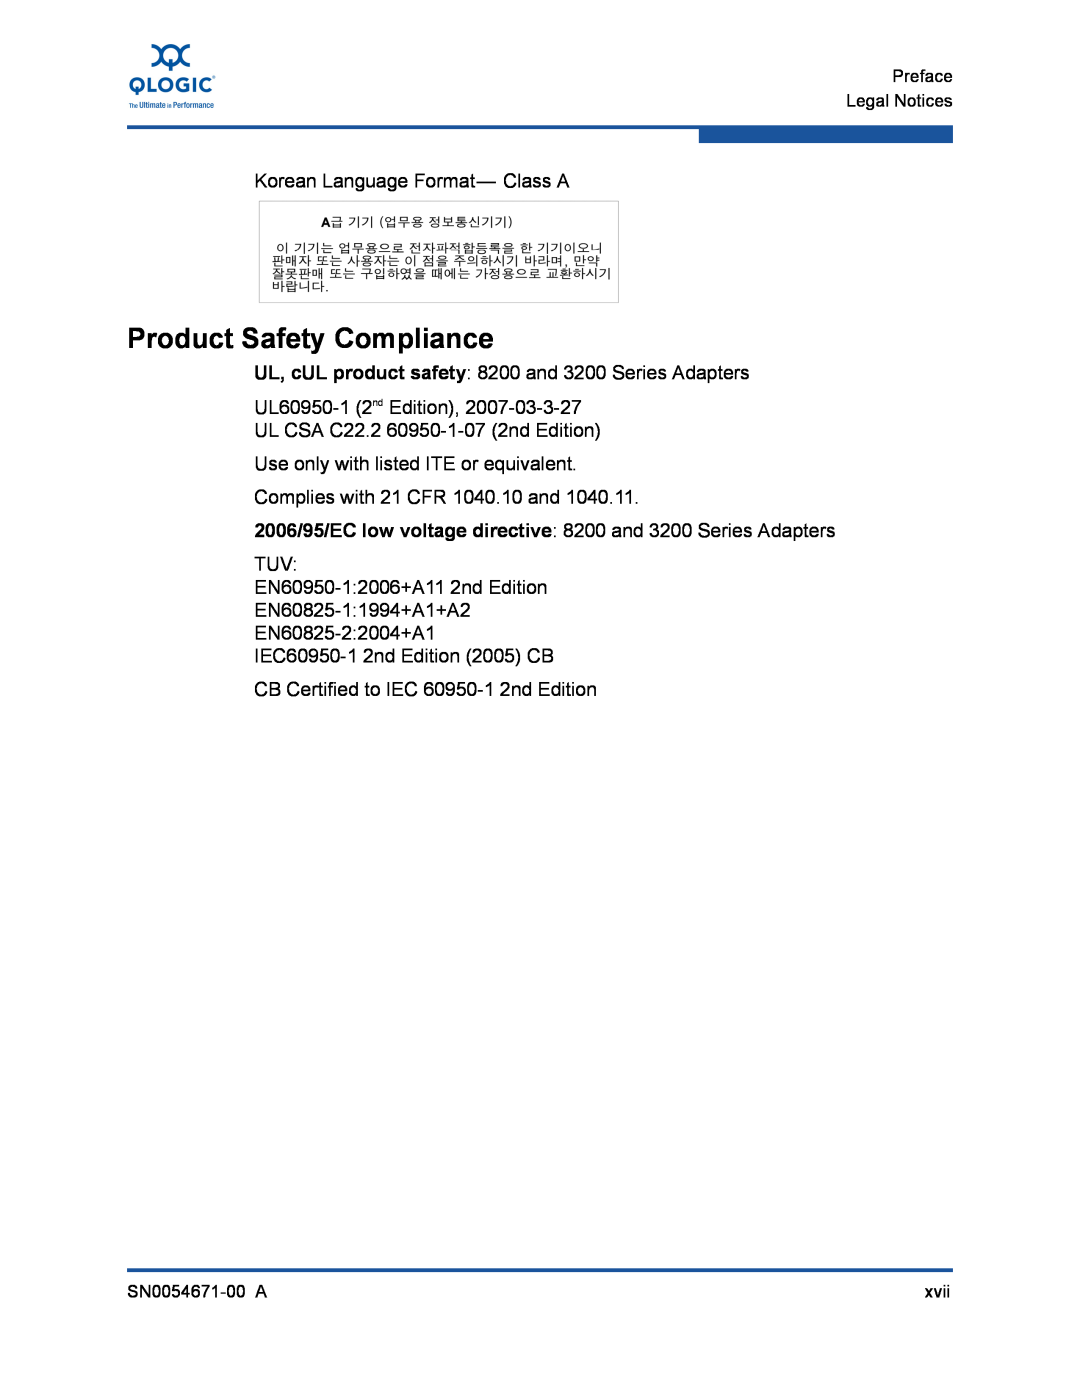 Q-Logic manual Product Safety Compliance, 2006/95/EC low voltage directive 8200 and 3200 Series Adapters 